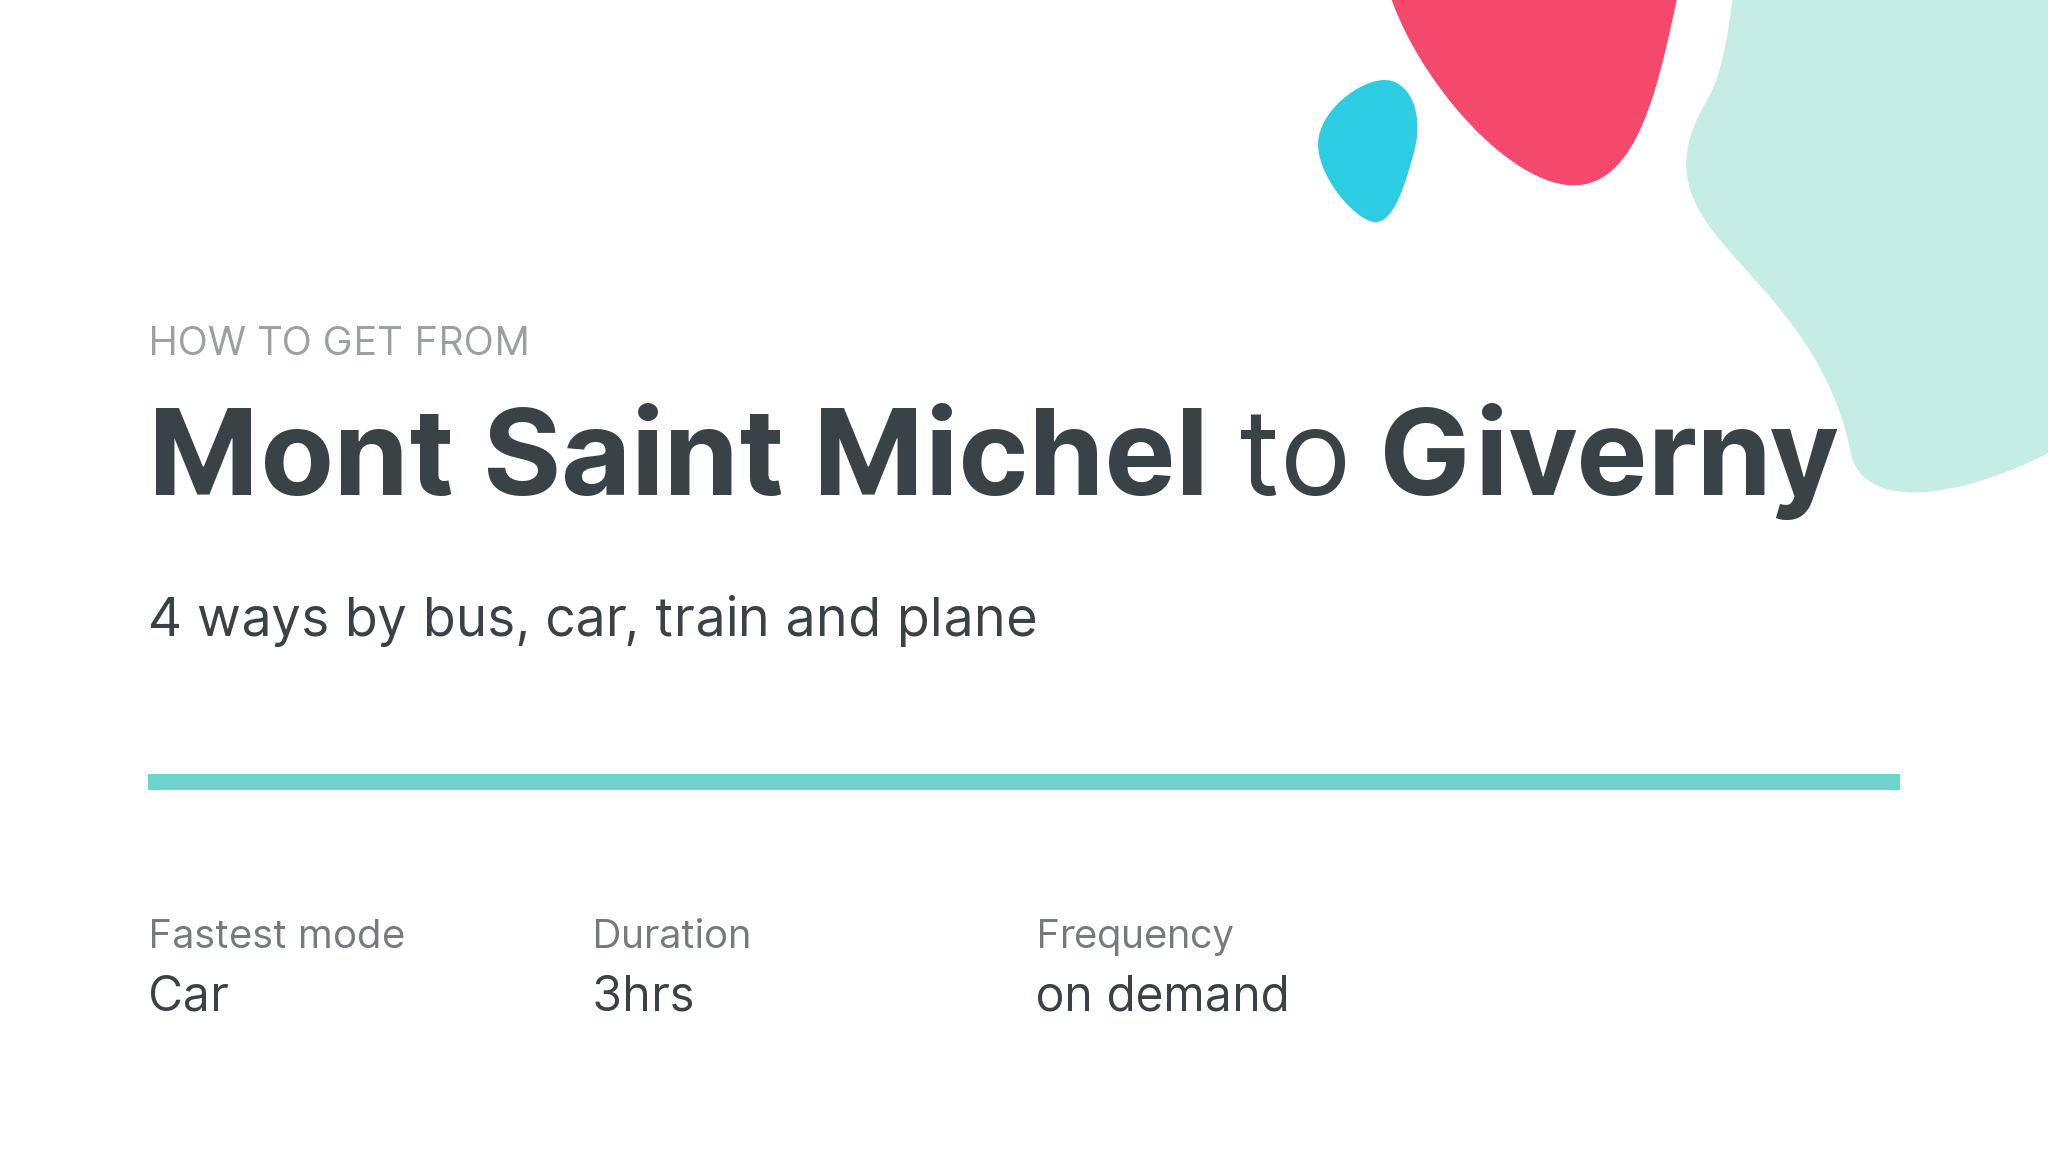 How do I get from Mont Saint Michel to Giverny